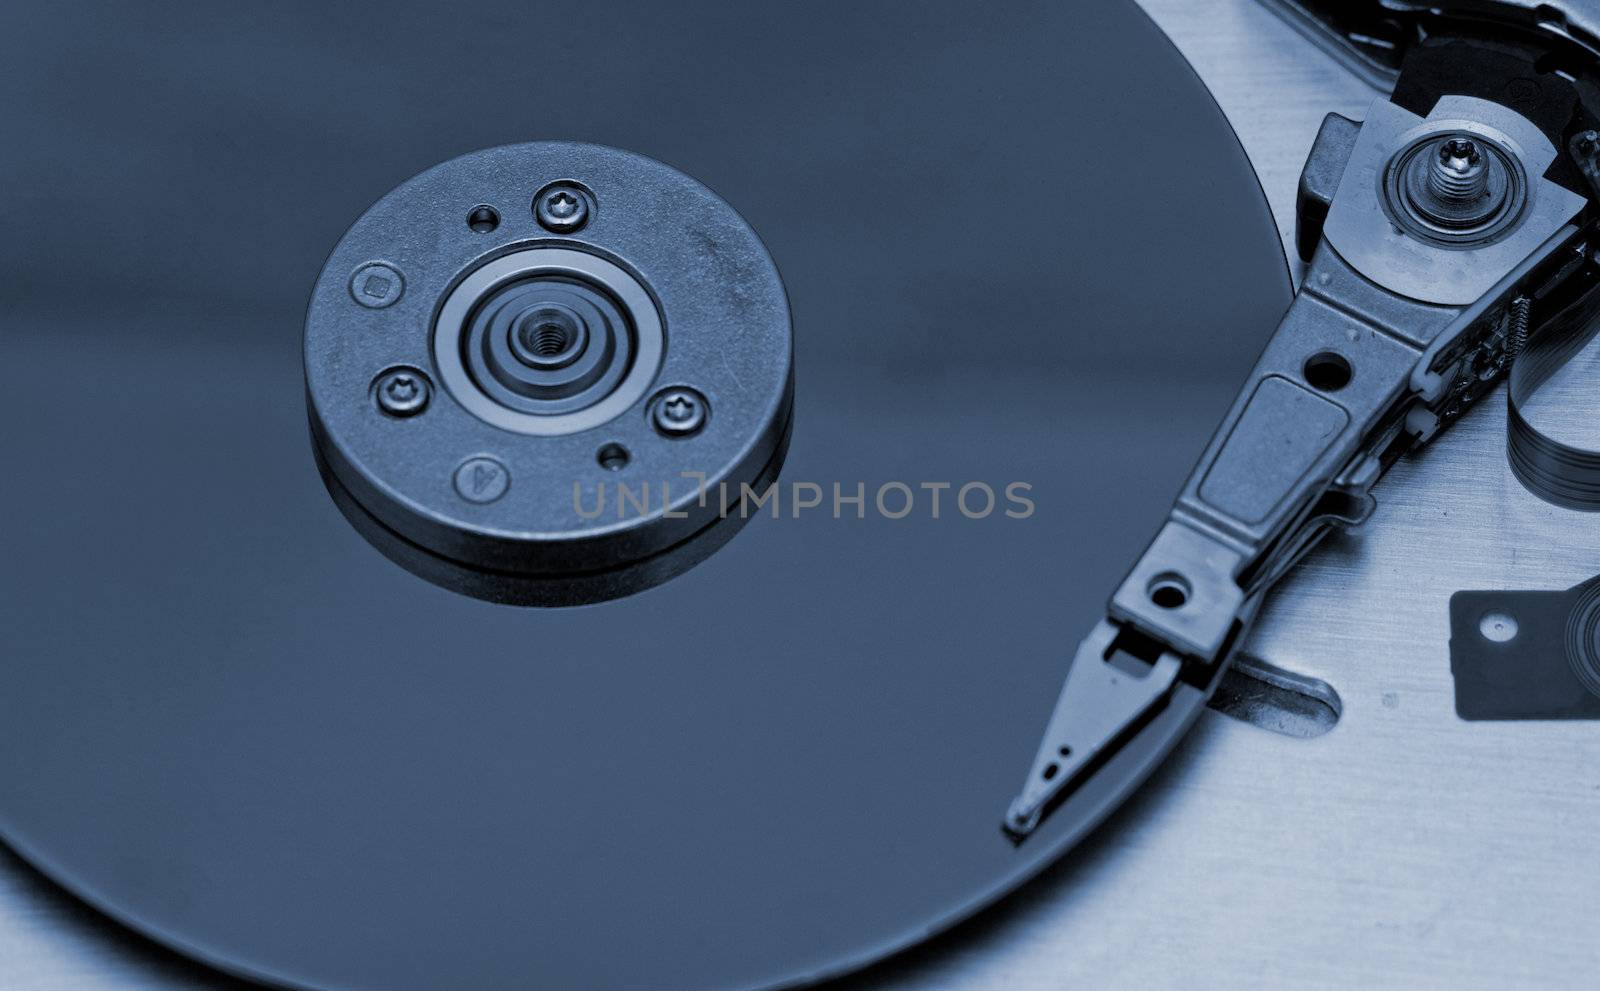 Open computer hard drive on white background by NagyDodo